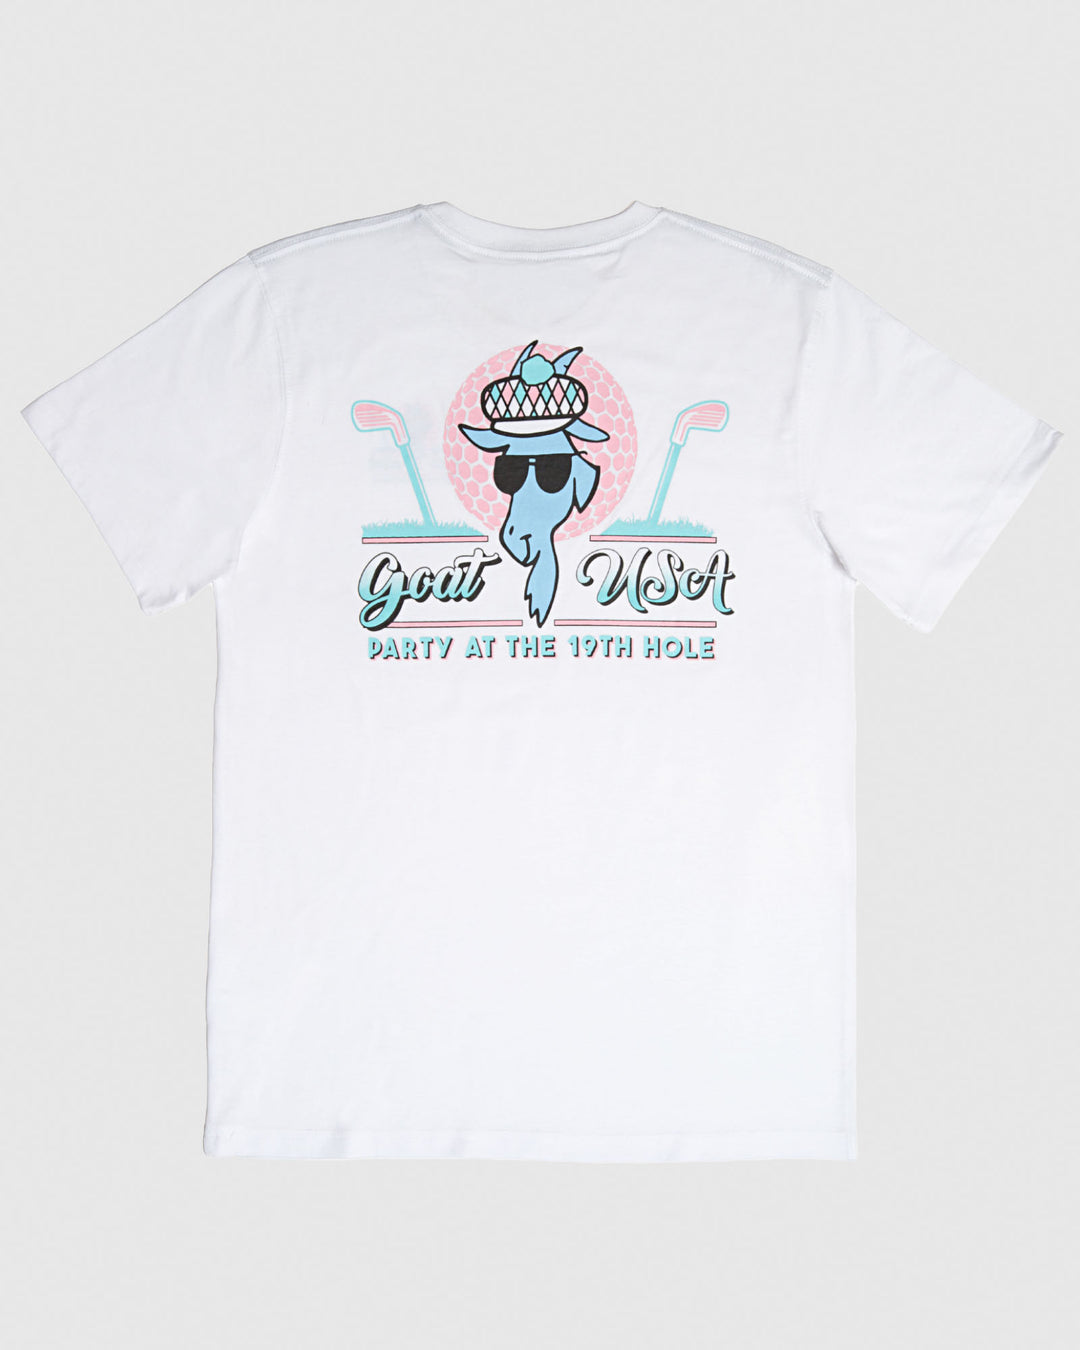 Back of white t-shirt with pink and blue golf design that reads "Party at the 19th Hole"